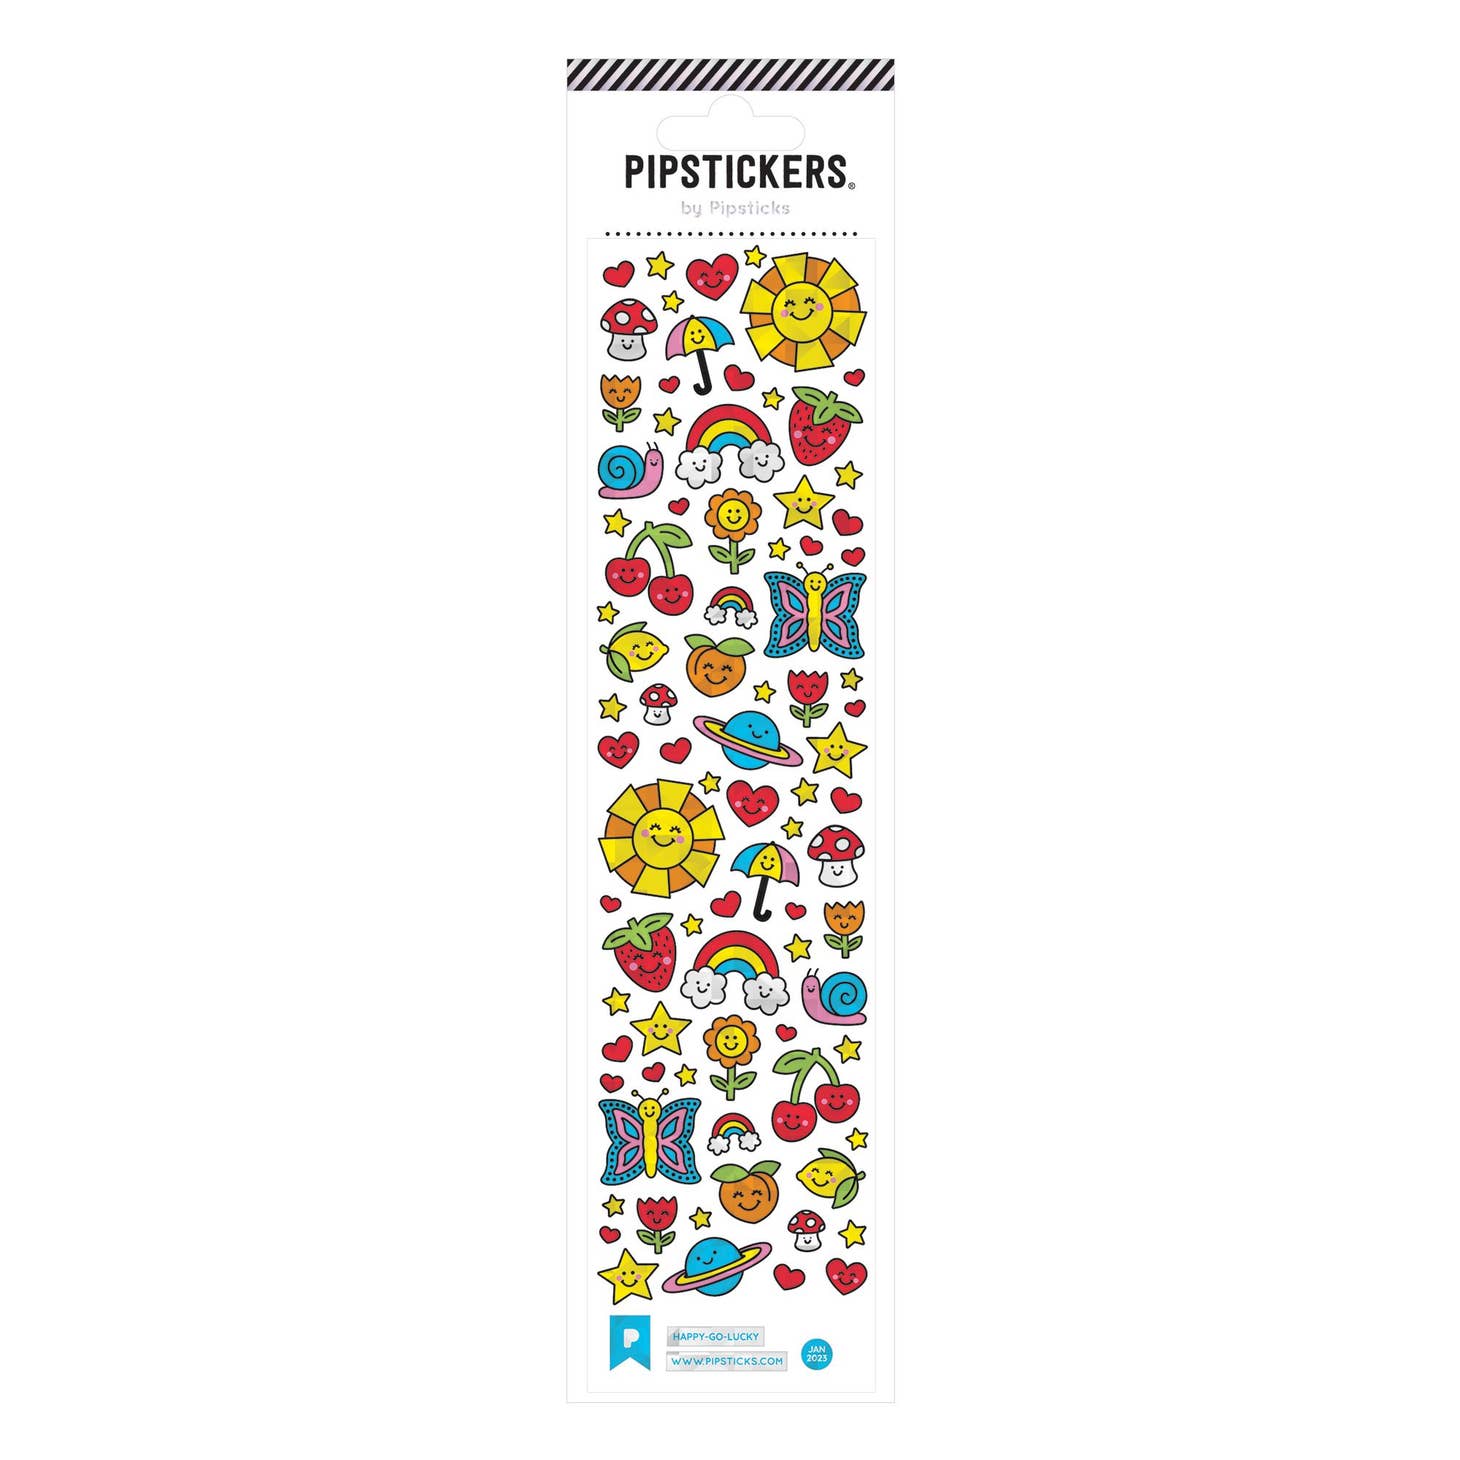 Sticker sheet with images of sun, umbrellas, rainbow, planets and flowers with smiling face in bright colors. 